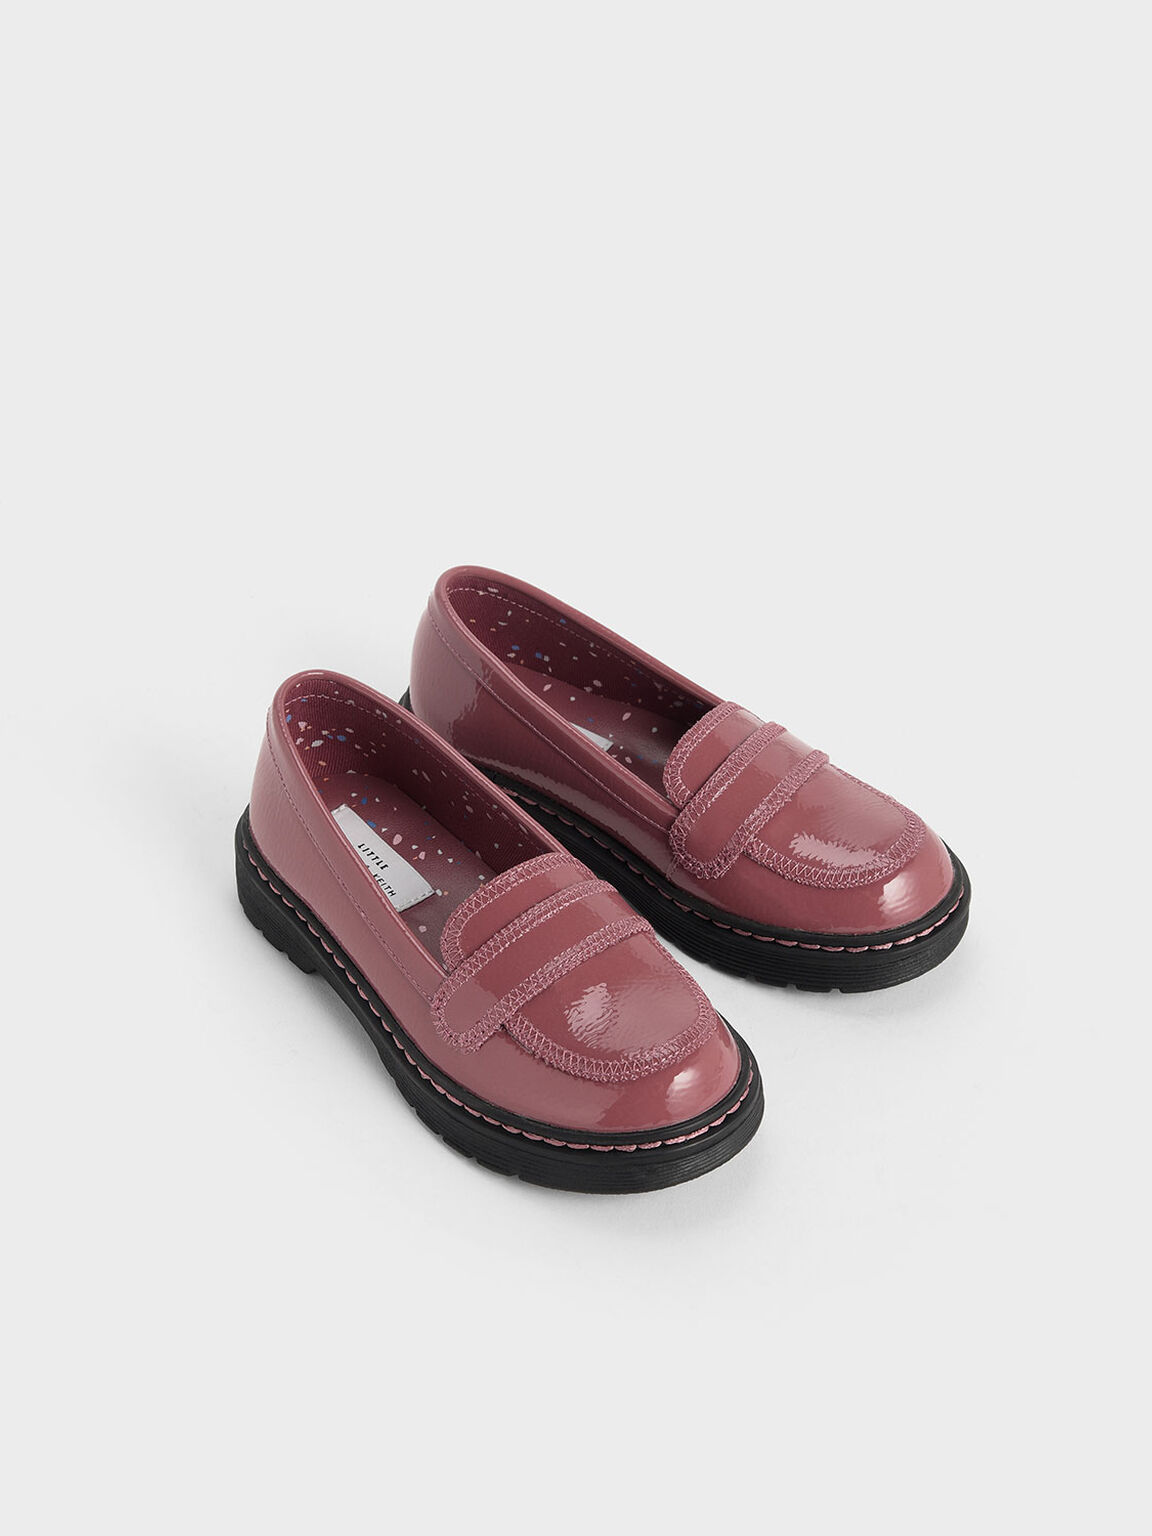 Girls&apos; Overlock Stitch Patent Loafers, Pink, hi-res